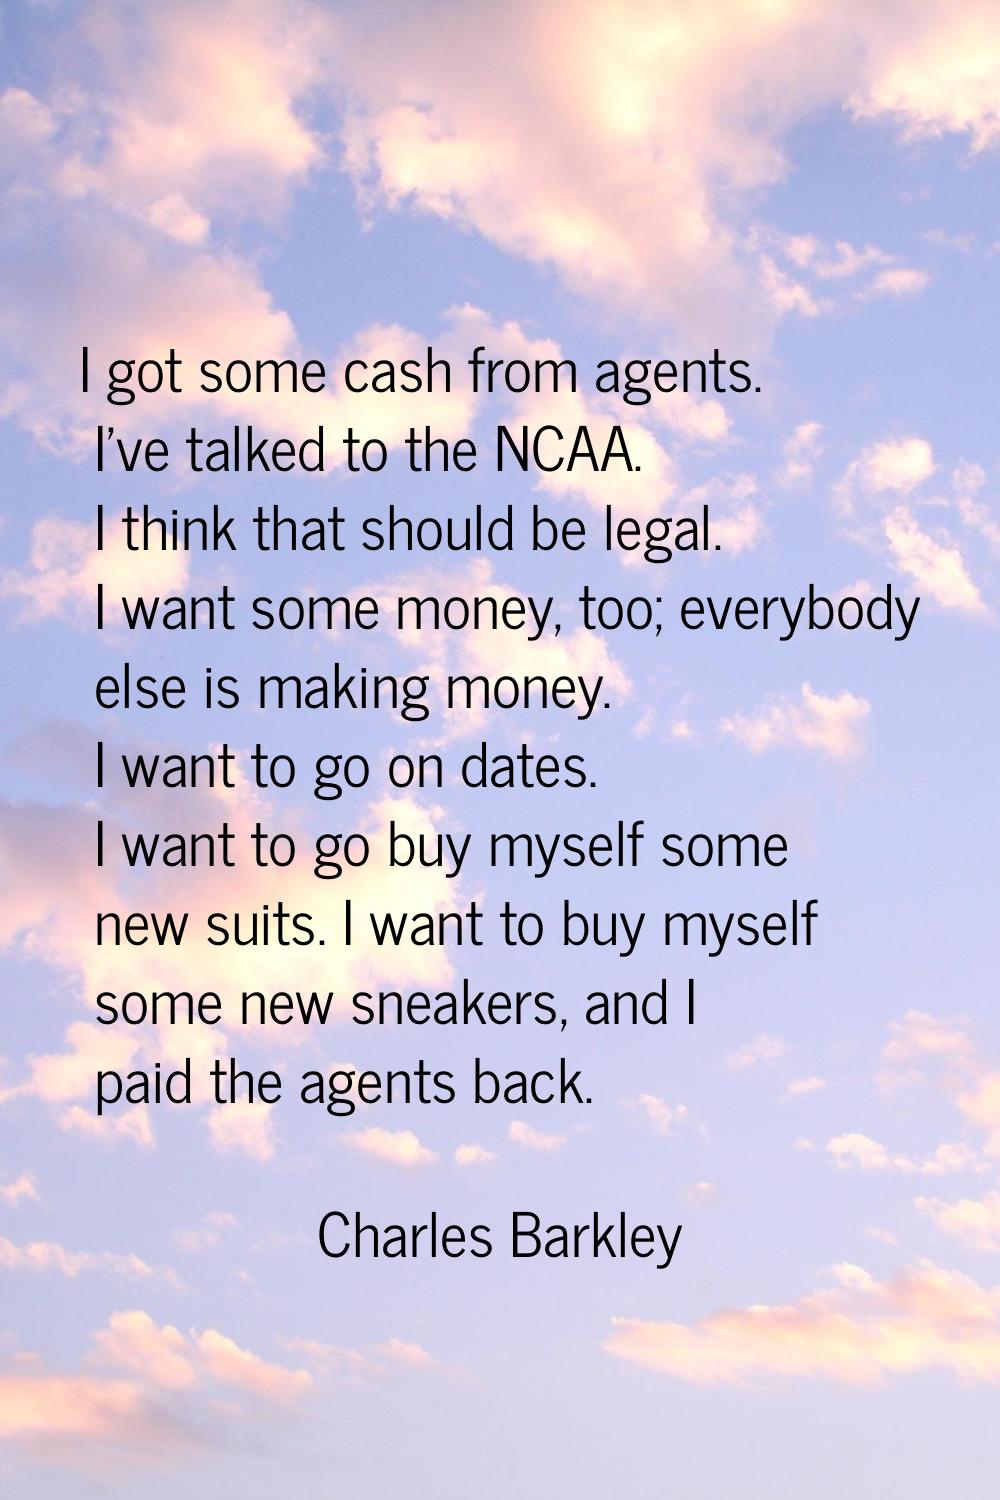 I got some cash from agents. I've talked to the NCAA. I think that should be legal. I want some mon